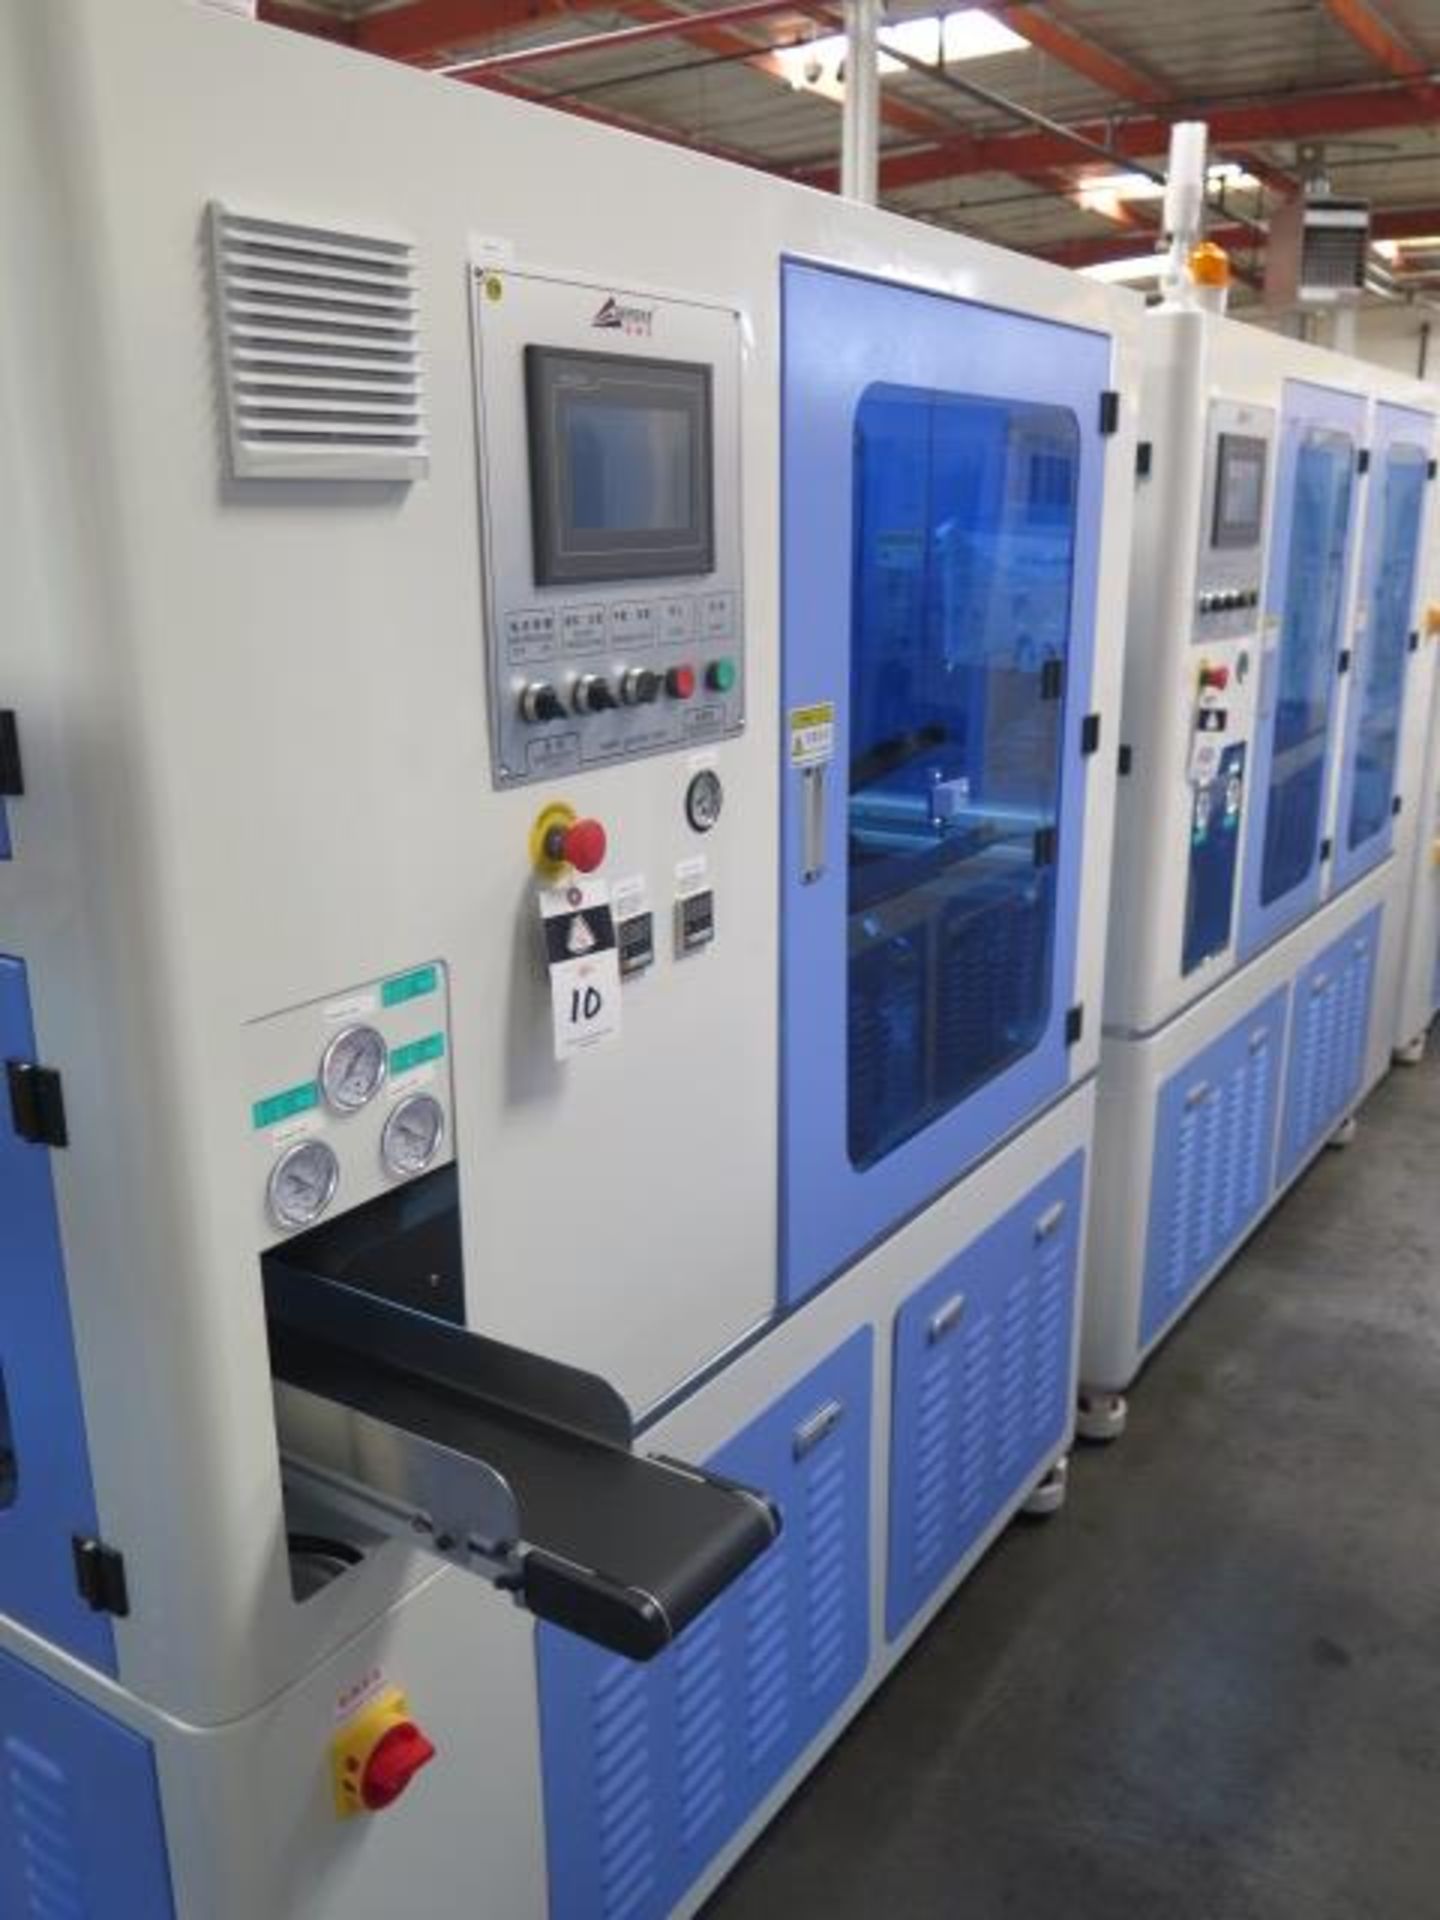 3/2021 Gereke mdl. GRK-TWO1 Cassette Assembly and Packaging Line s/n GRK20210305079, SOLD AS IS